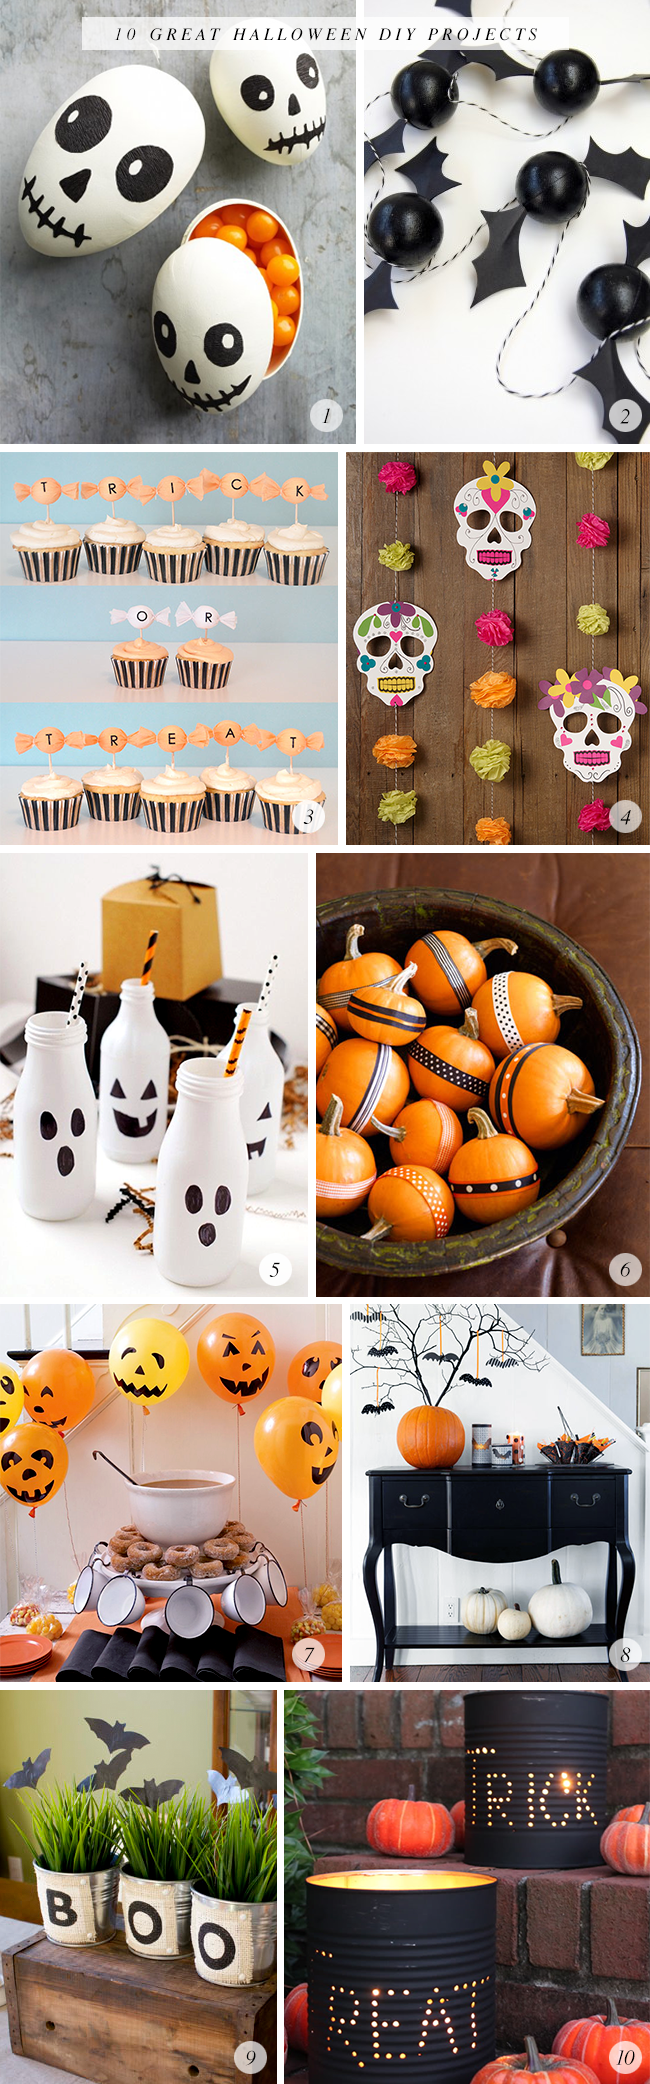 10 Great Halloween DIY Projects via Bubby and Bean